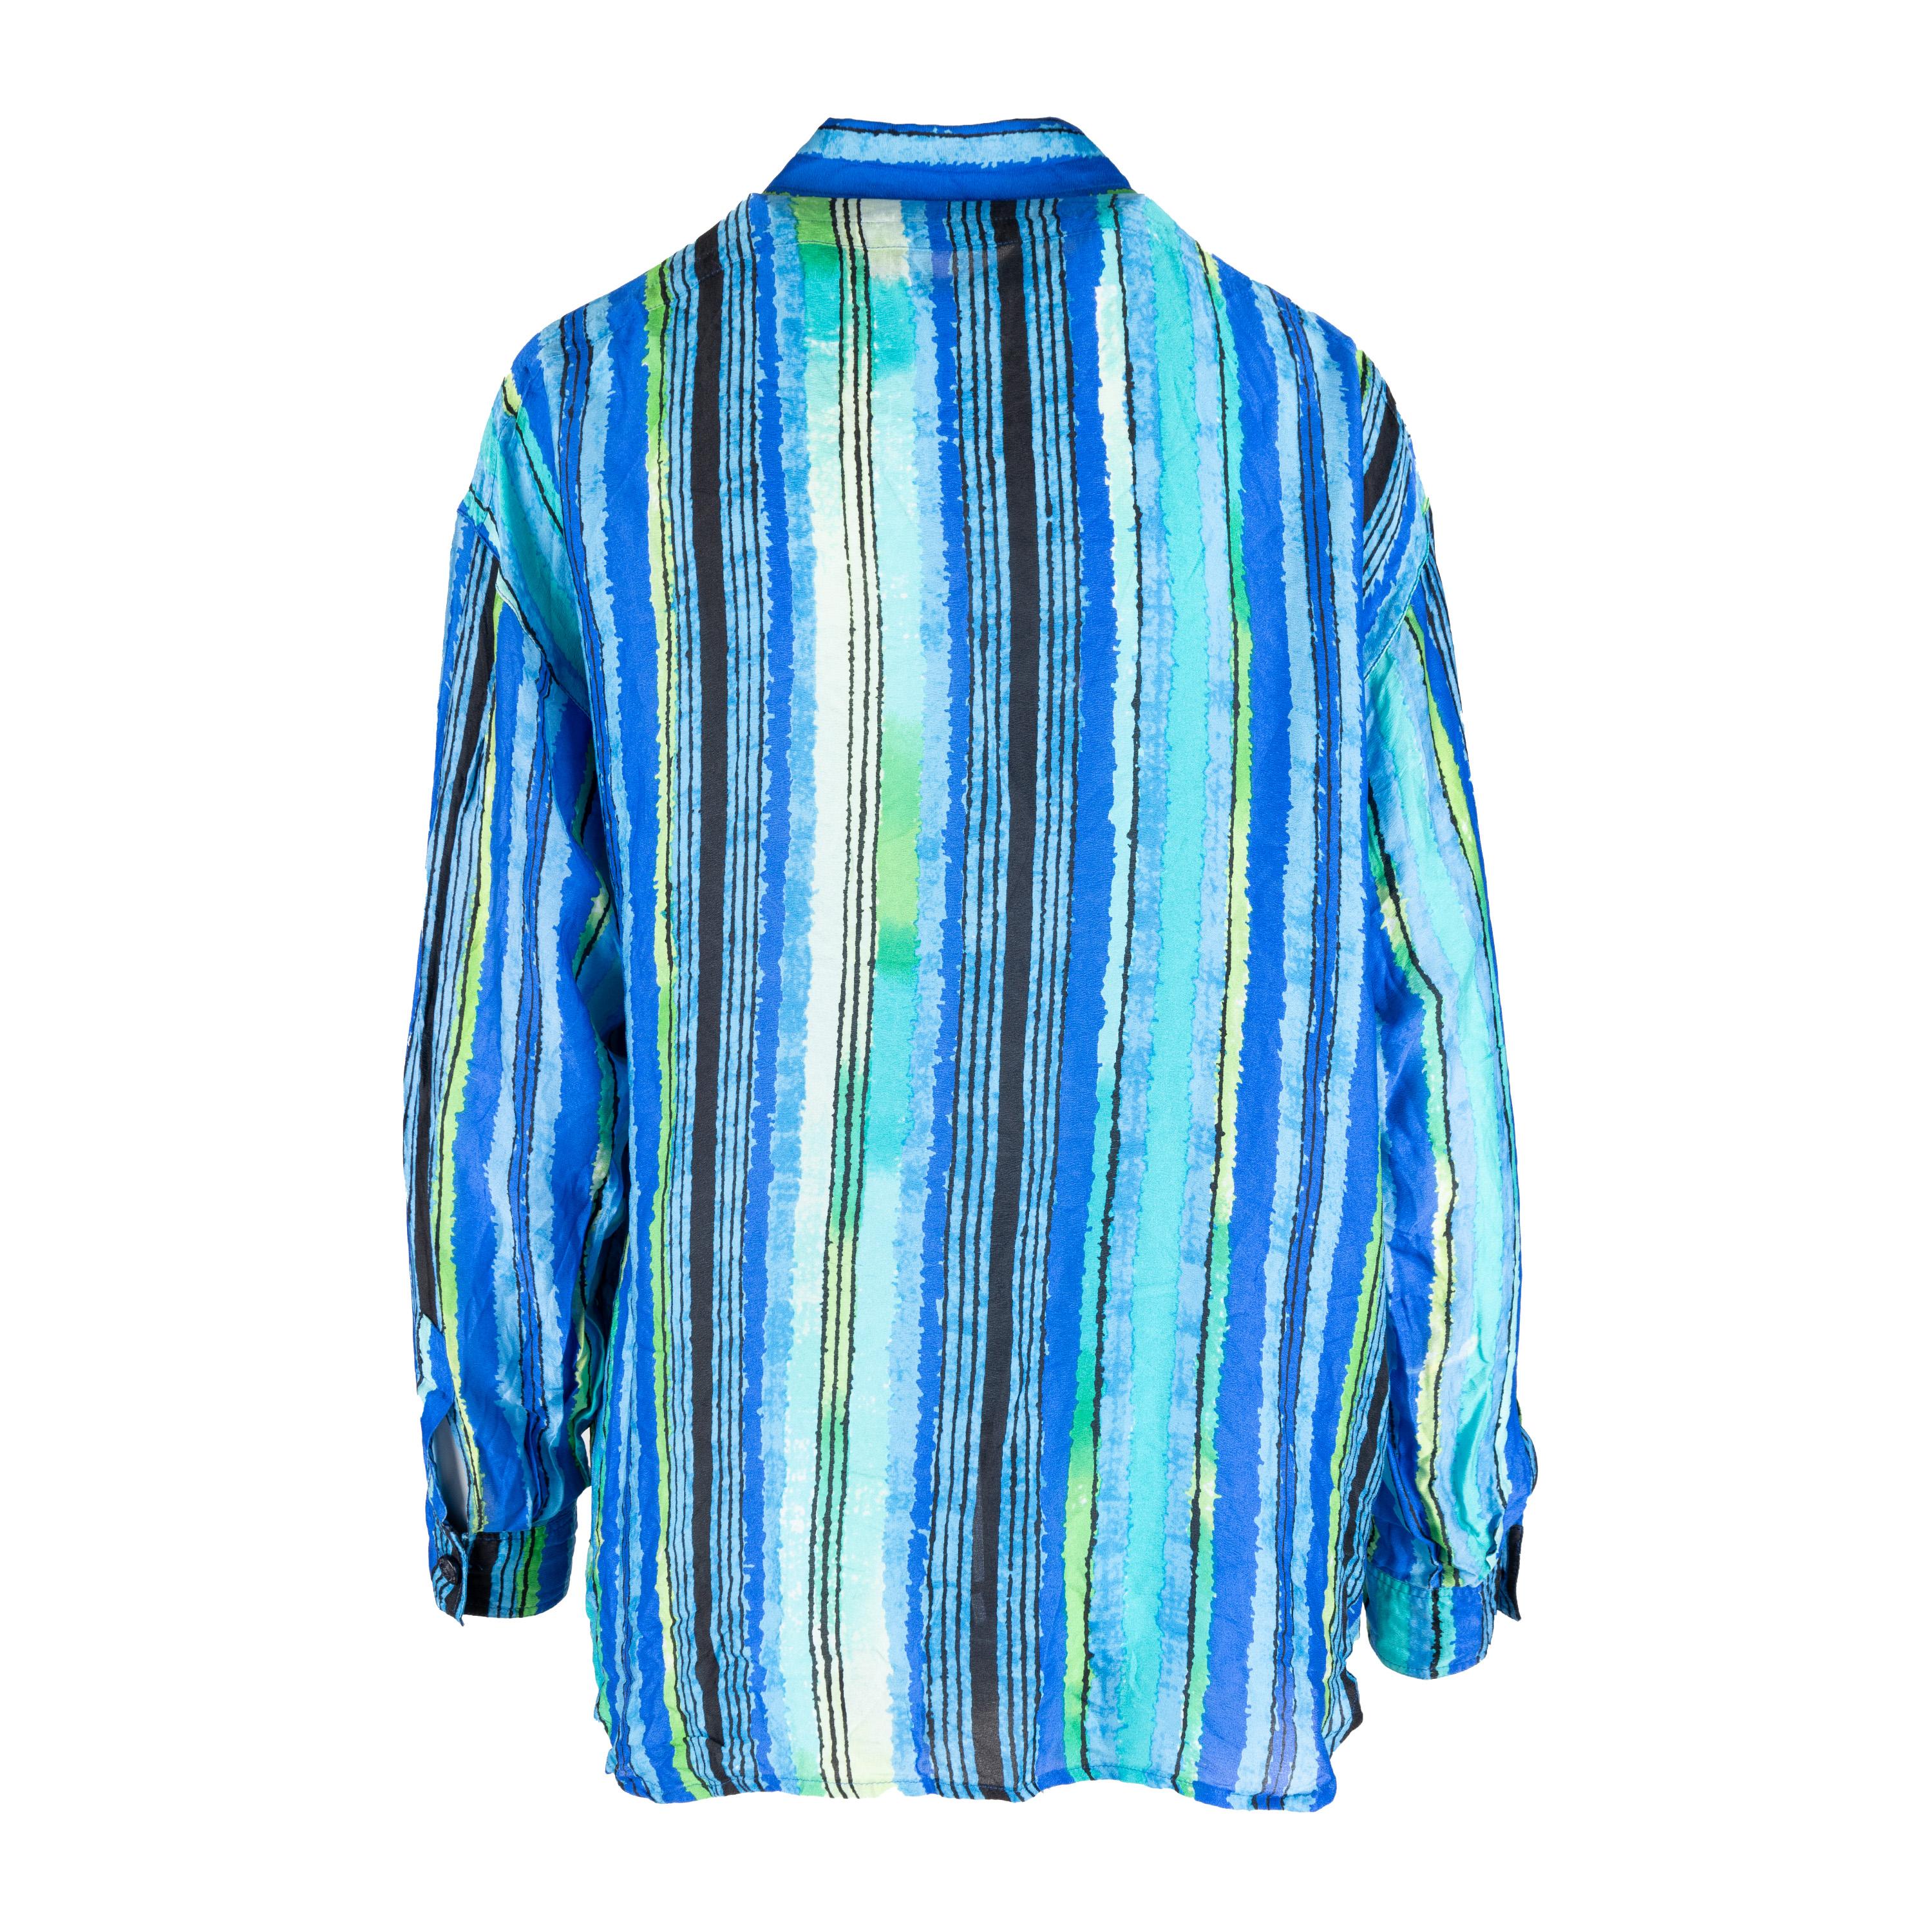 This long-sleeve Gianni Versace shirt is crafted from soft, lightweight fabric with a vibrant multicolor stripe pattern. The classic shirt collar and cuffs add an elegant finish, and it's finished with black buttons showcasing the signature Versace